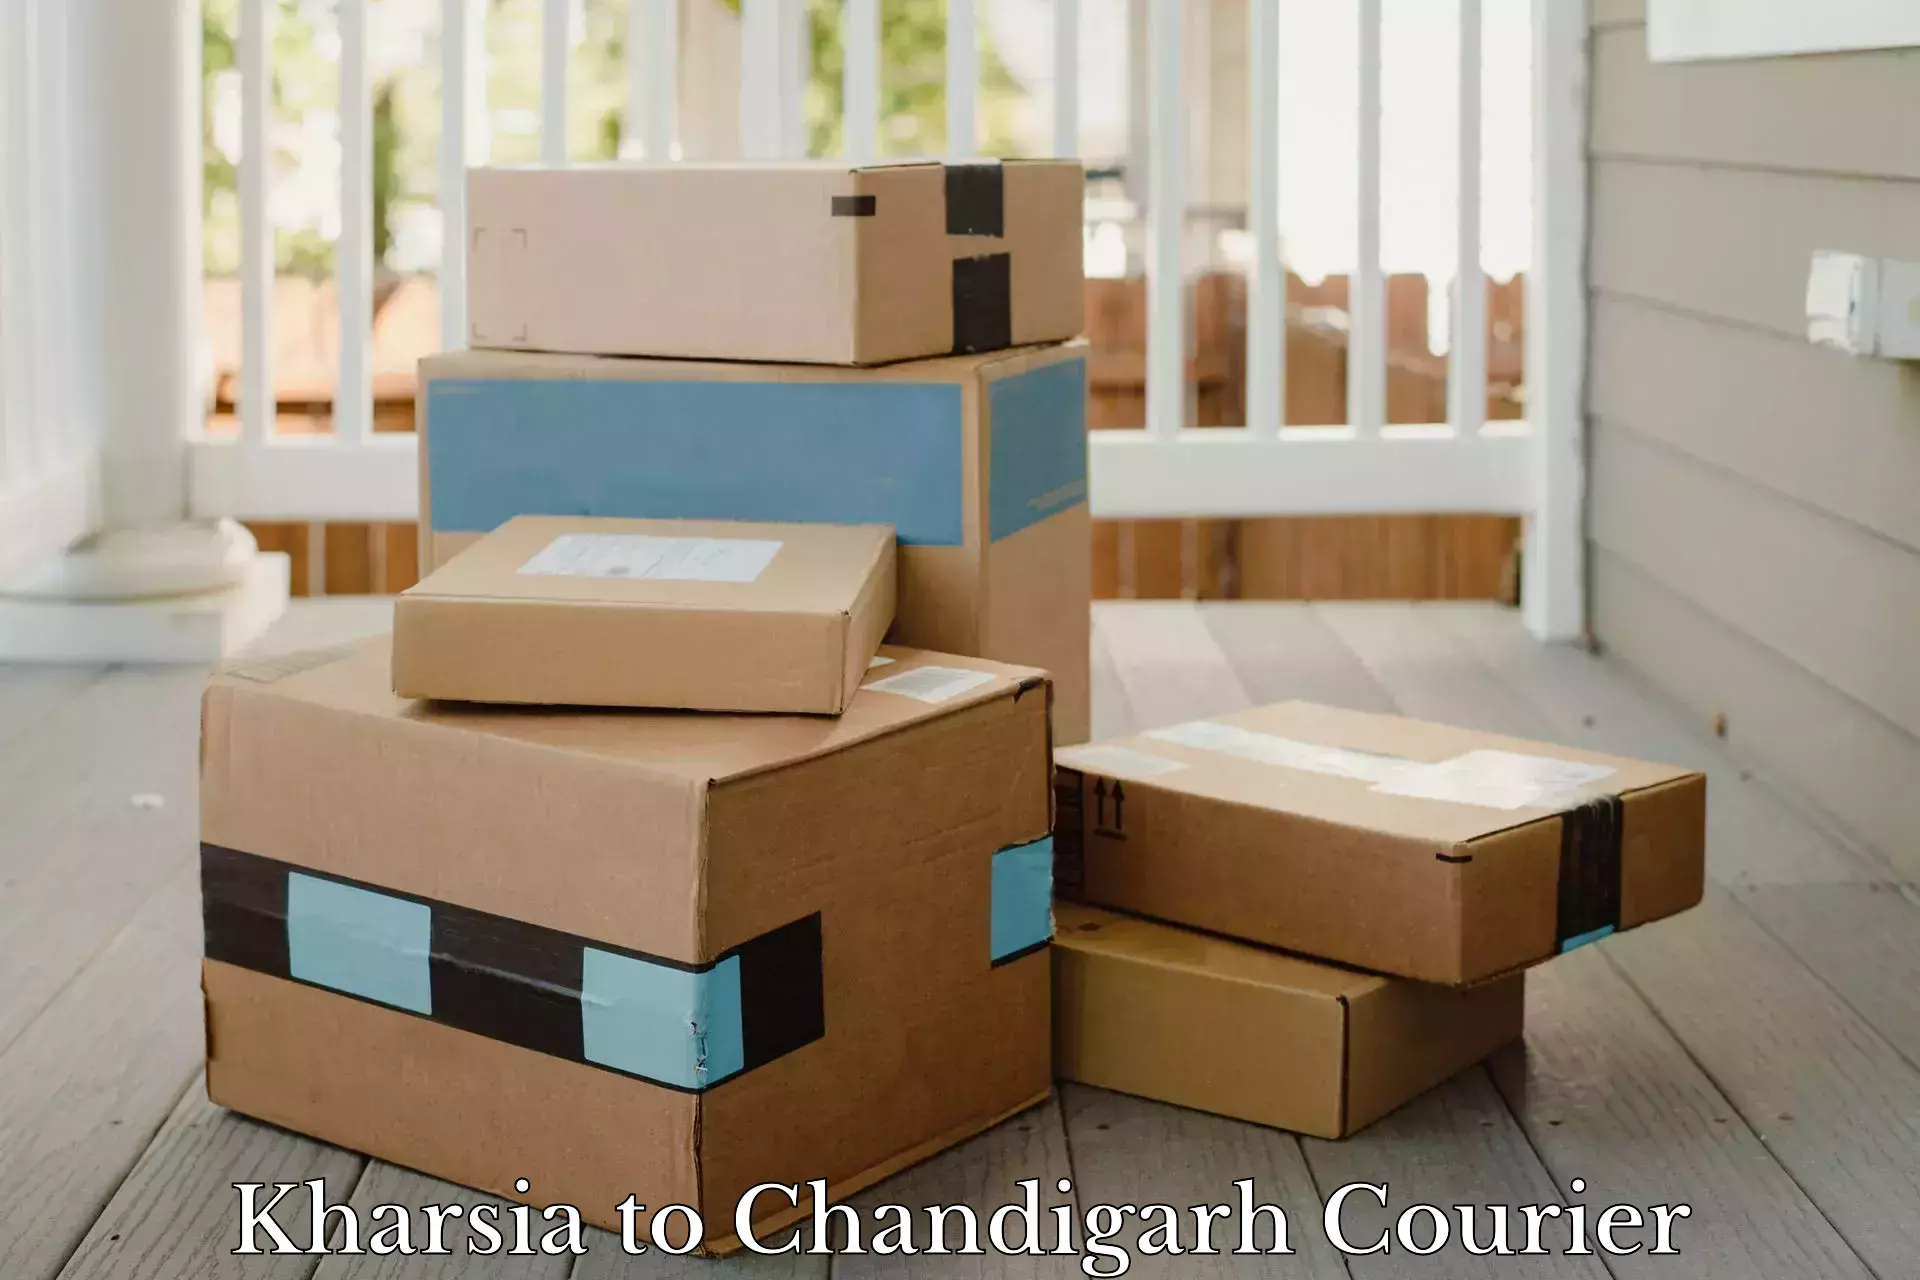 Doorstep delivery service Kharsia to Chandigarh